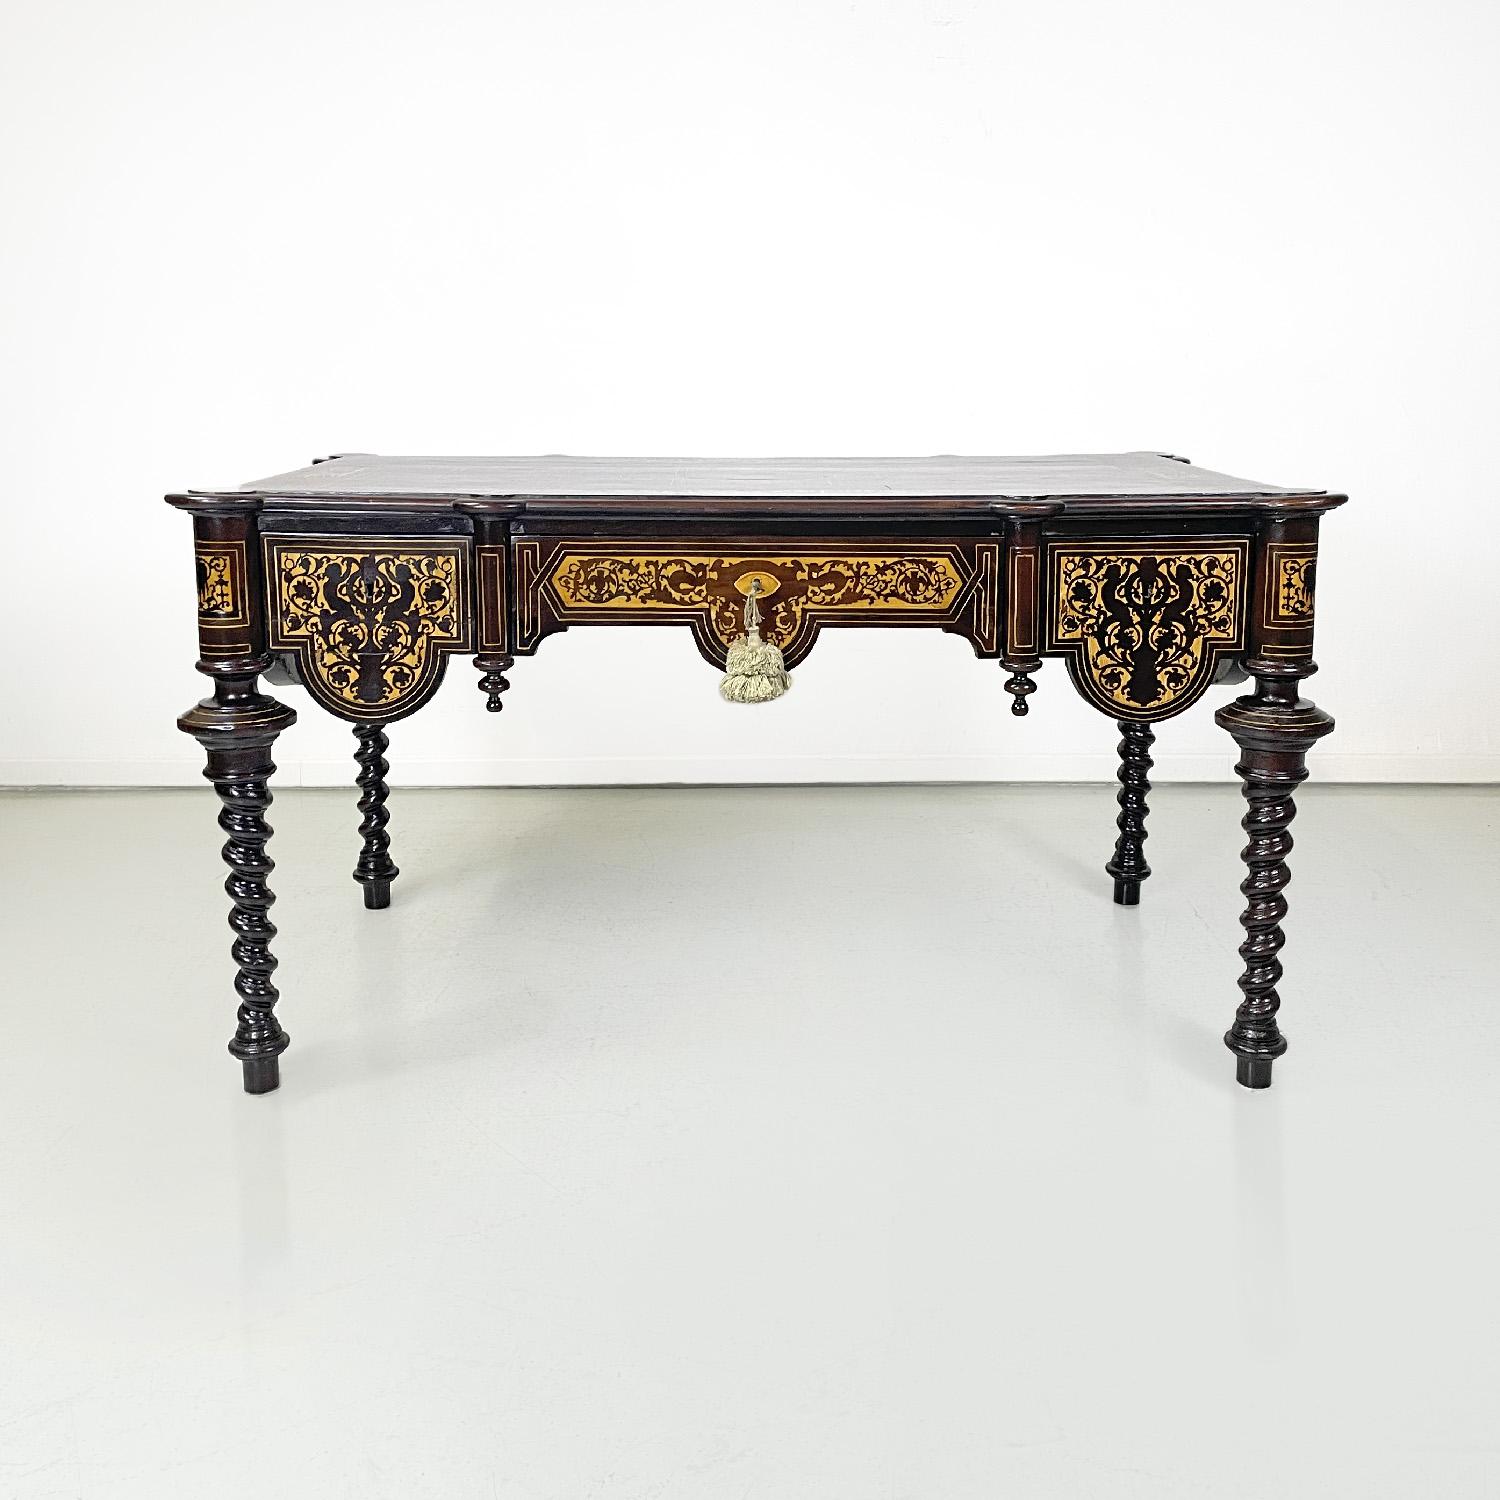 Italian antique wooden desk with inlay decorations with light wood, early 1900s
Wooden rectangular desk in finely decorated and inlaid light wood. The top has a geometric inlaid decoration, and has circular corners. It has three richly decorated